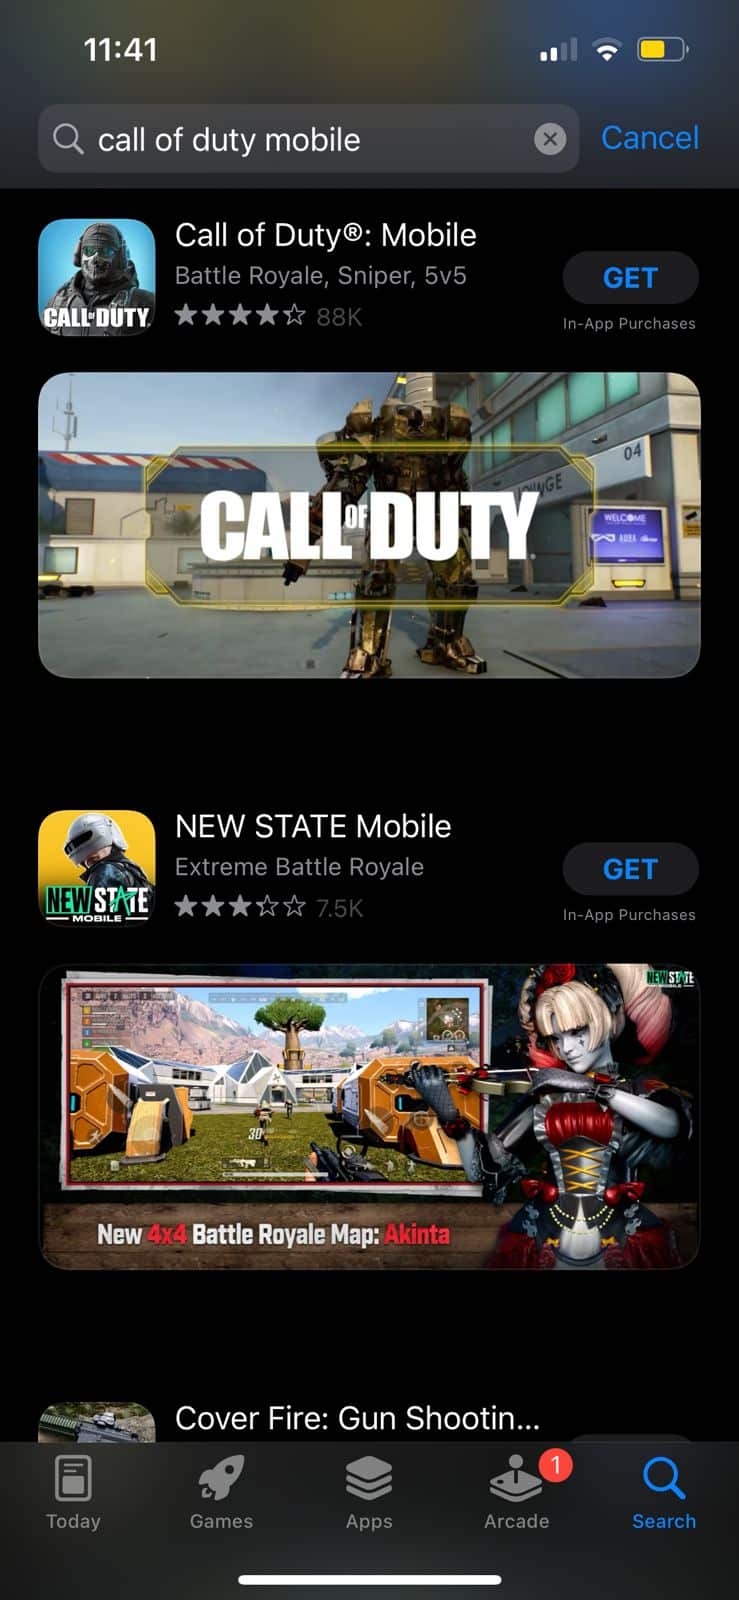 Call of Duty Mobile on app store